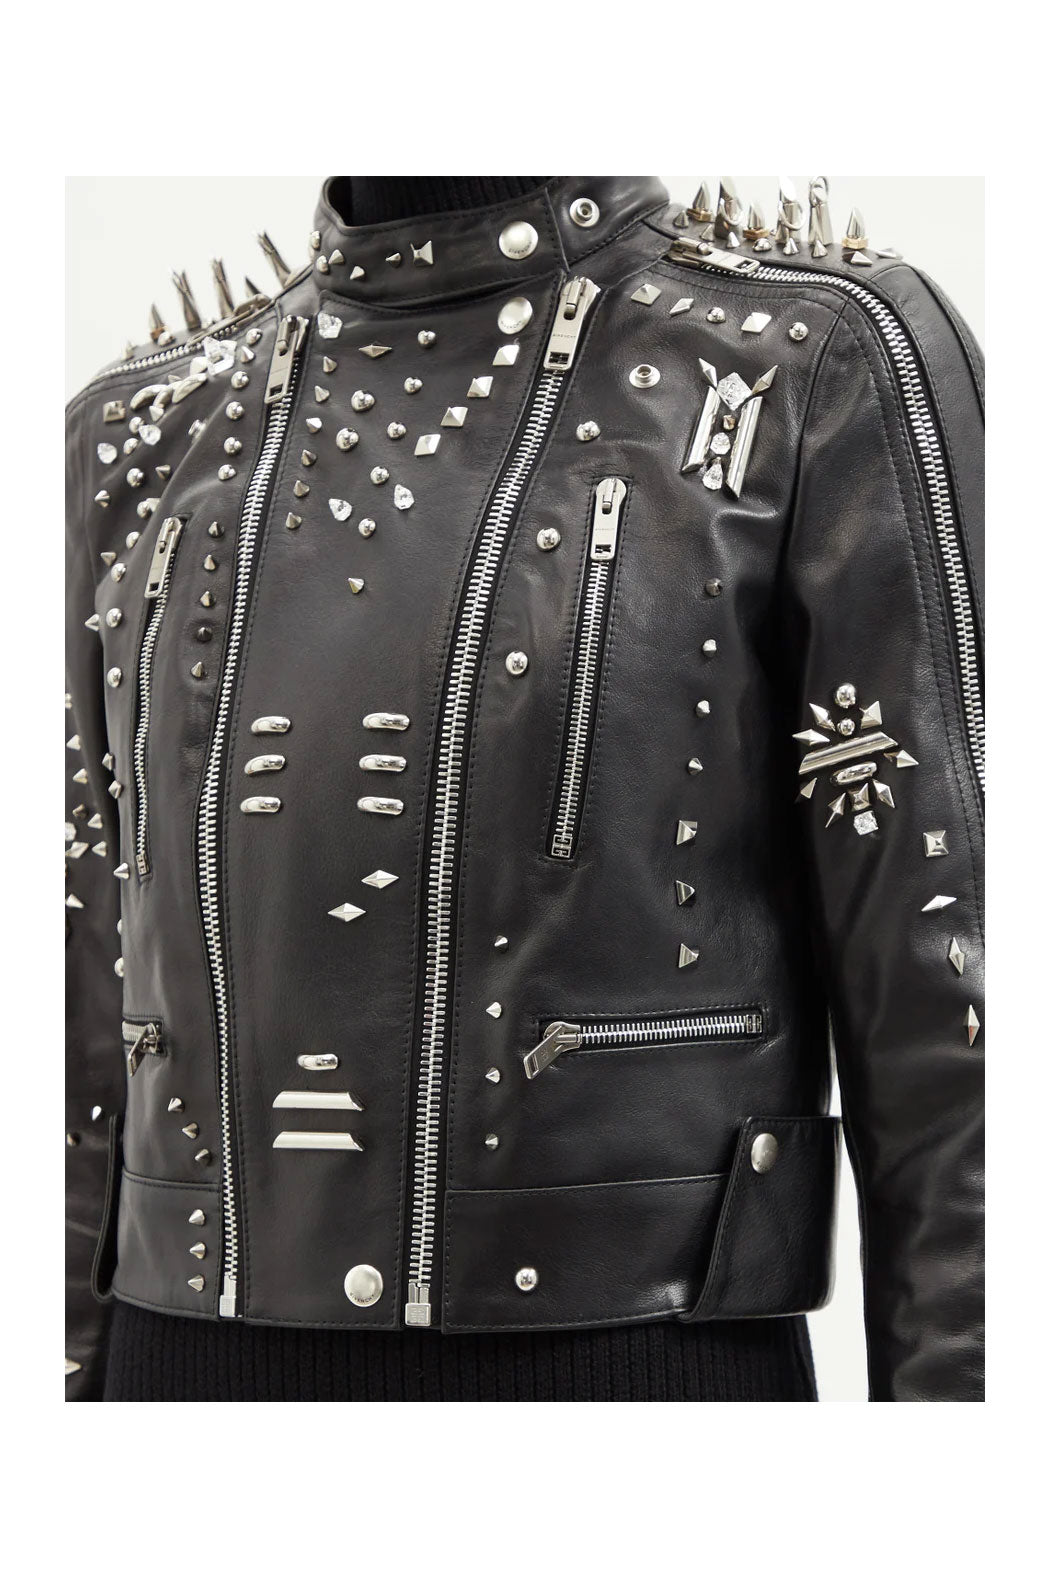 New Women Style Silver Long Spiked Studded Black Motorcycle Leather Biker Jacket